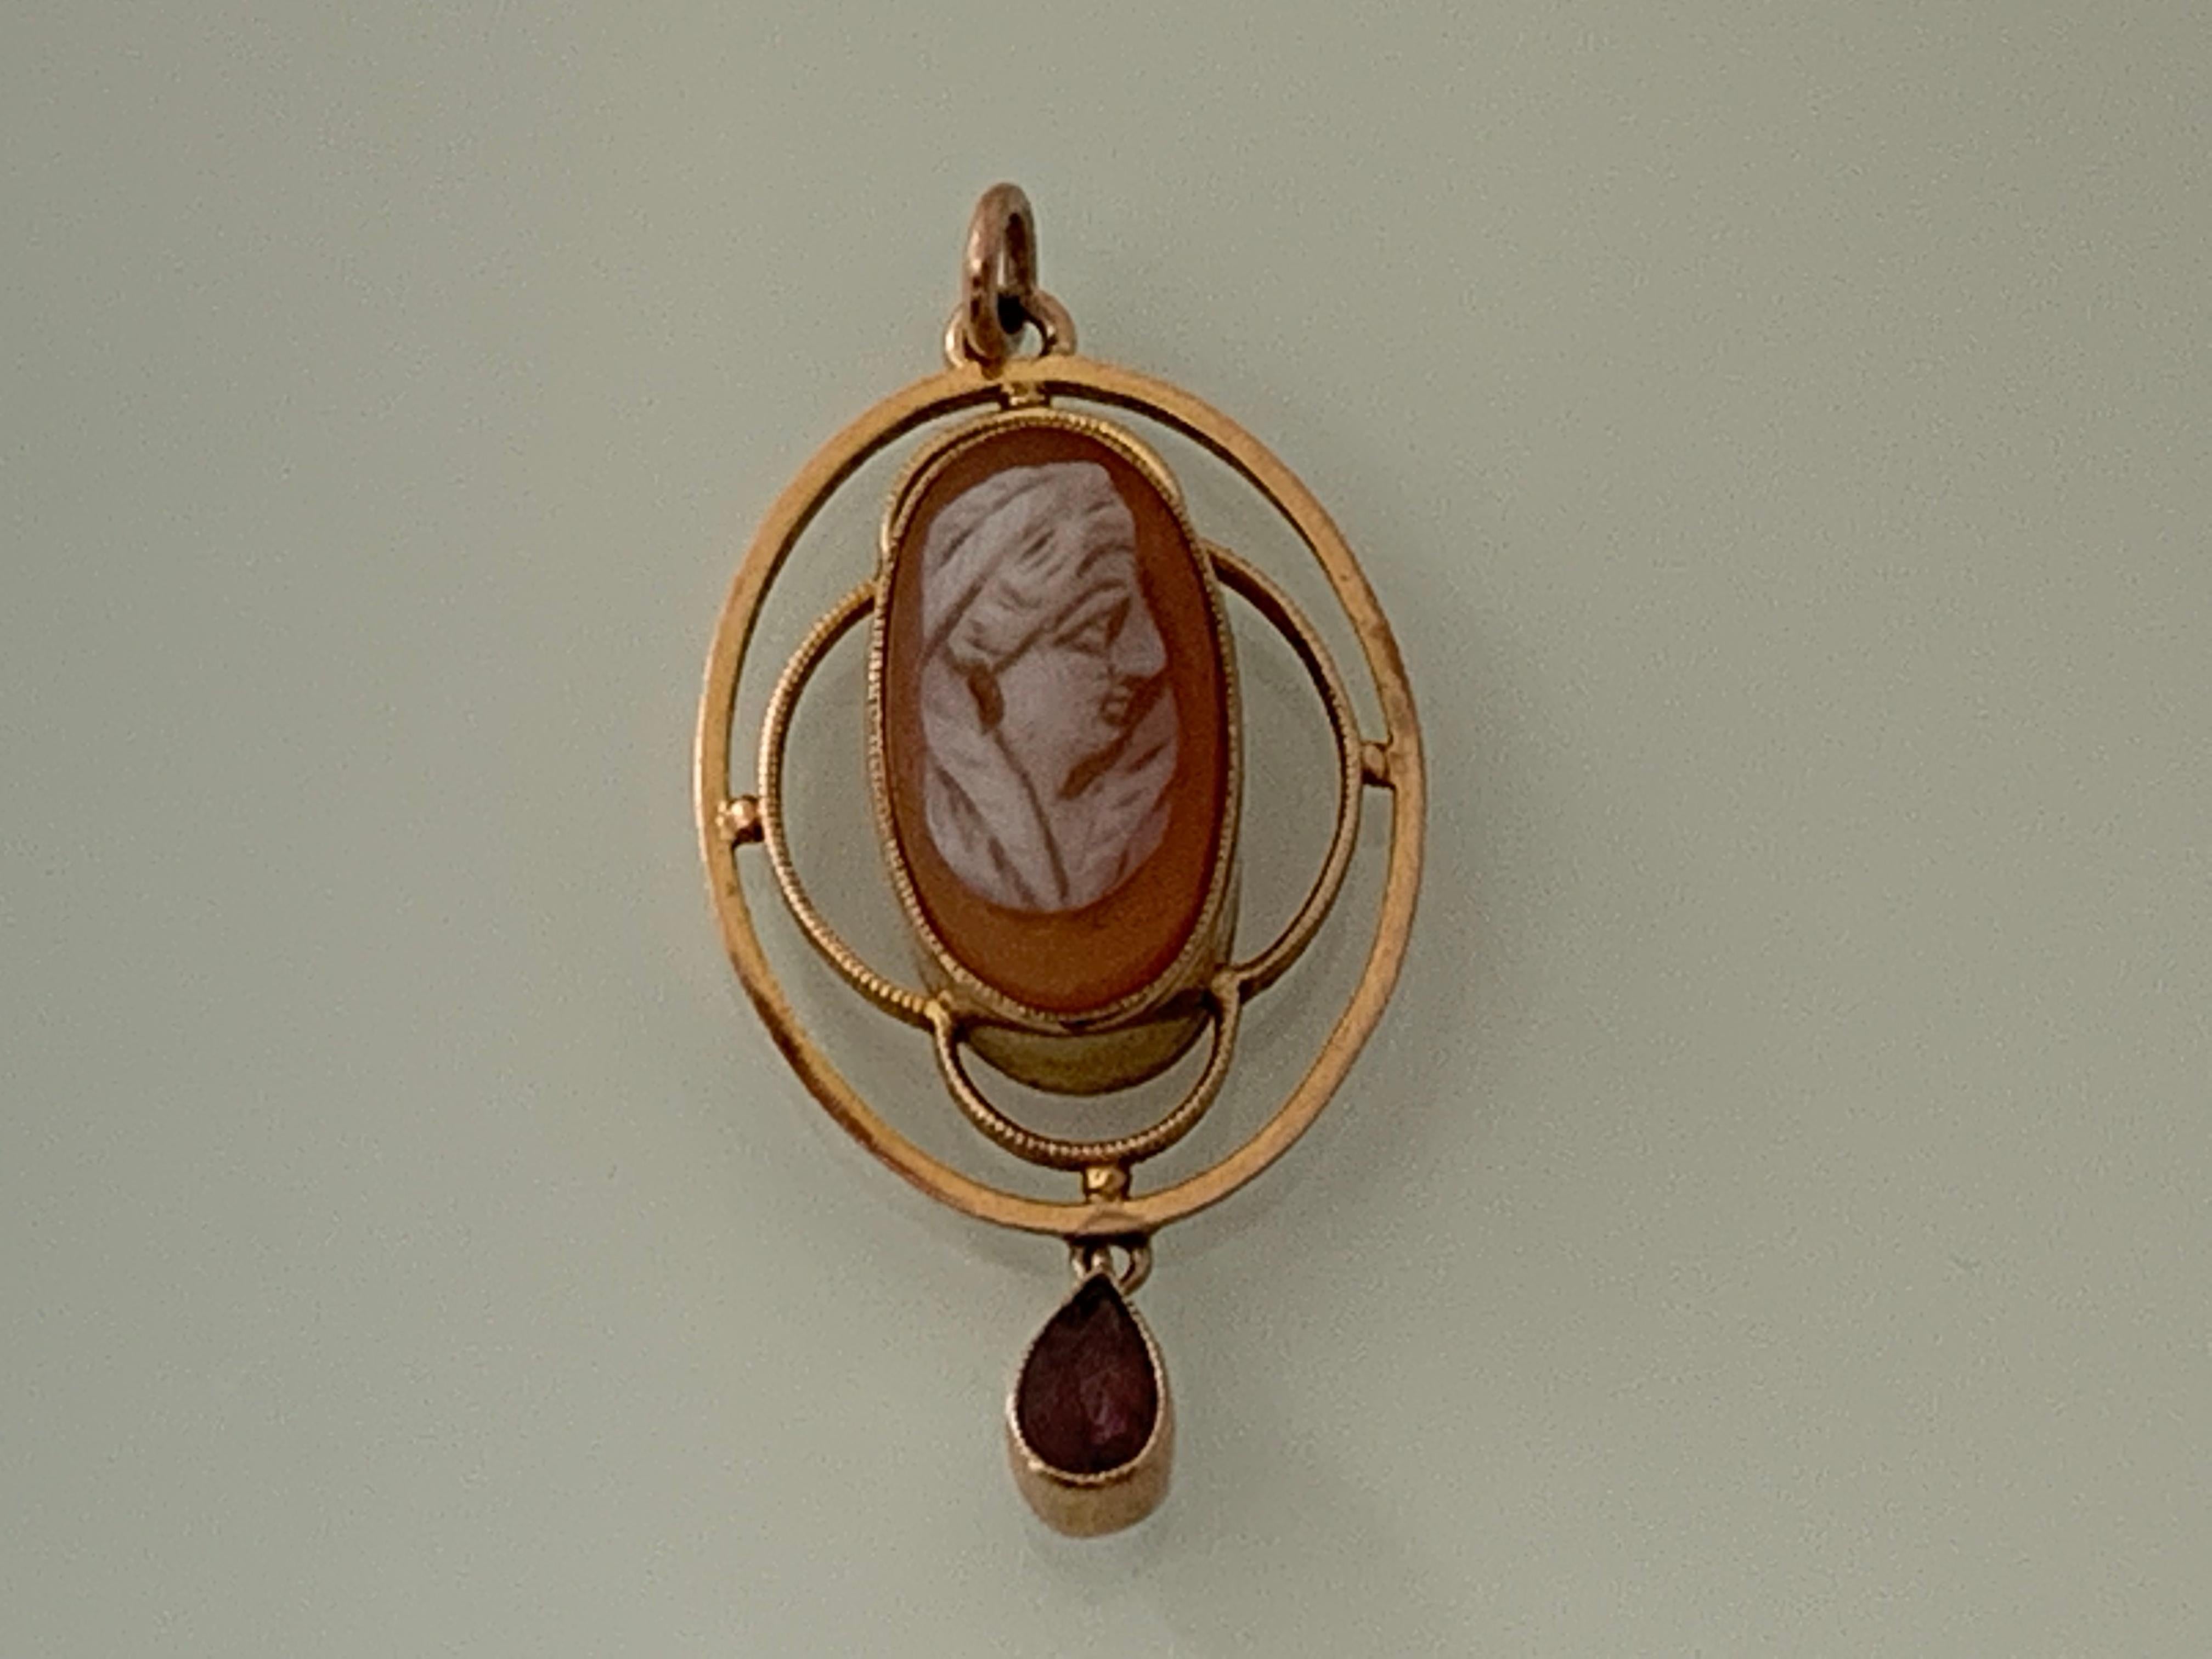 9ct Gold Italian Antique Cameo Pendant 
Hand carved cameo shell with a darker than usual background
enhanced by the setting which allows light to transcend through
with a dangling red teardrop gem that has faceted cut
Art Deco Era 
The cameo has a